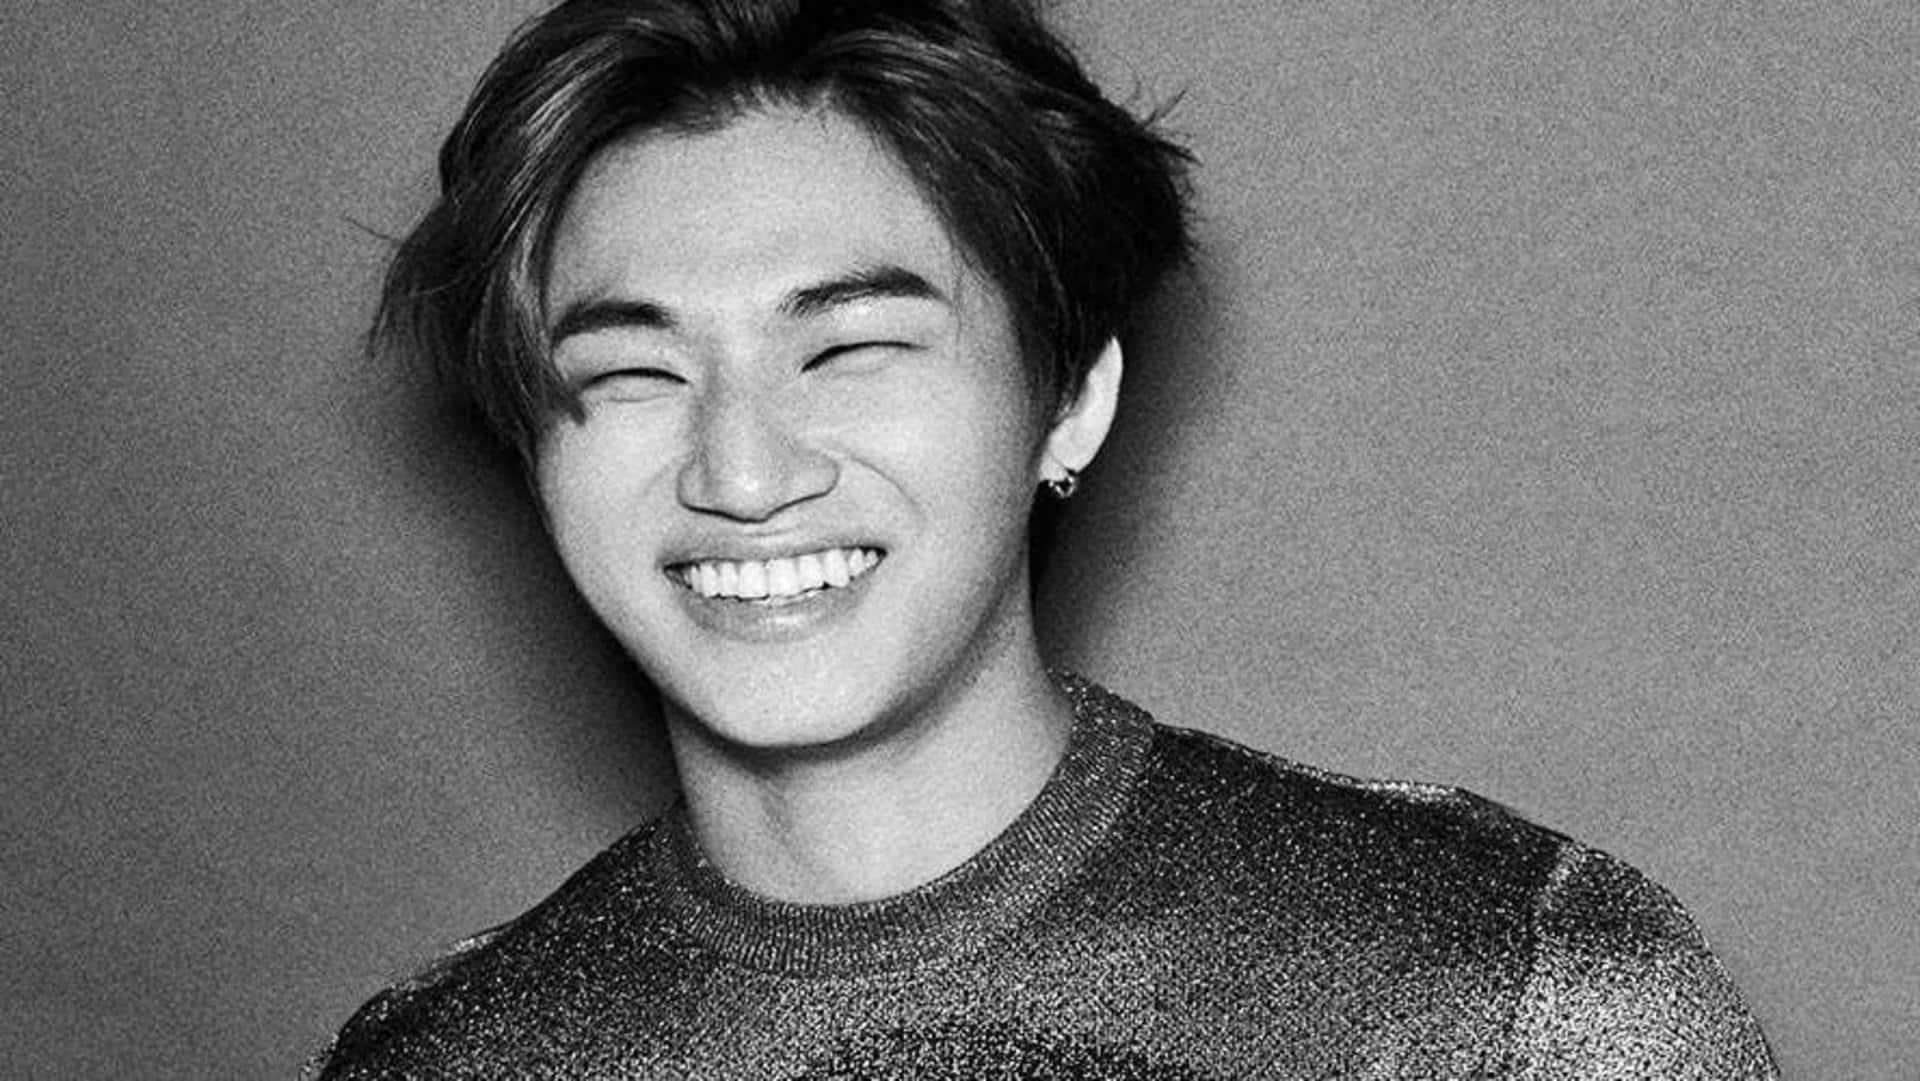 BIGBANG's Daesung joins new agency: Where are the other members